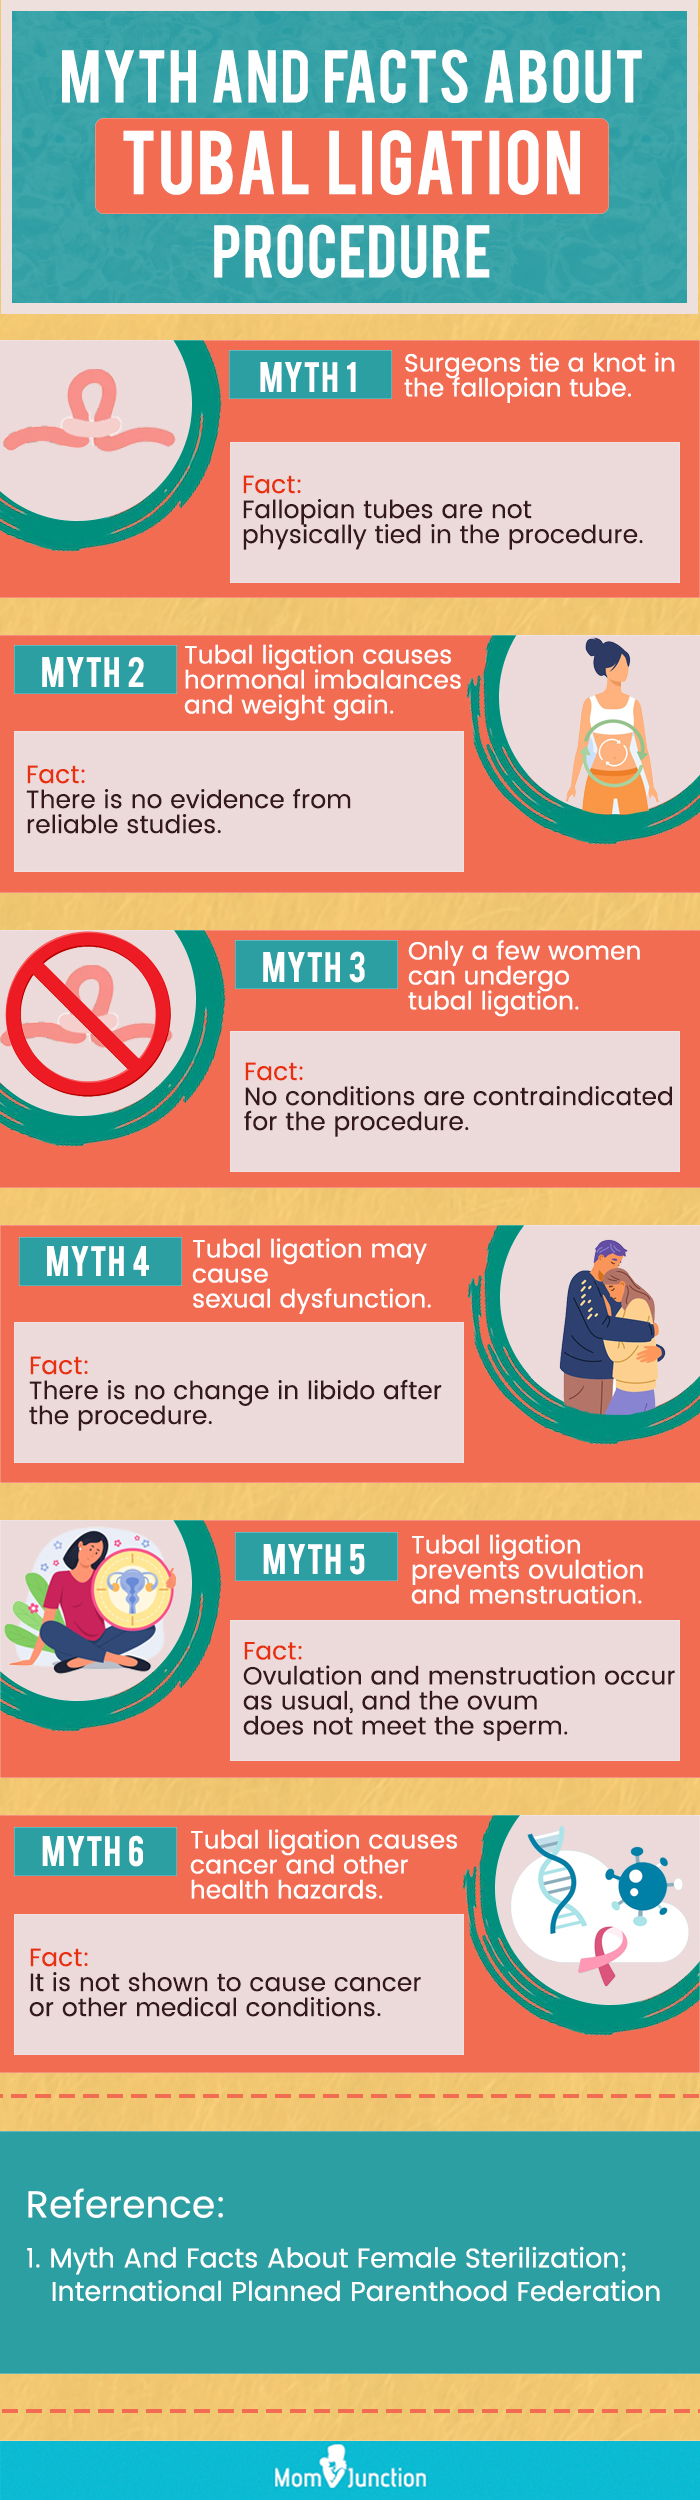 facts about tubal ligation procedure (infographic)